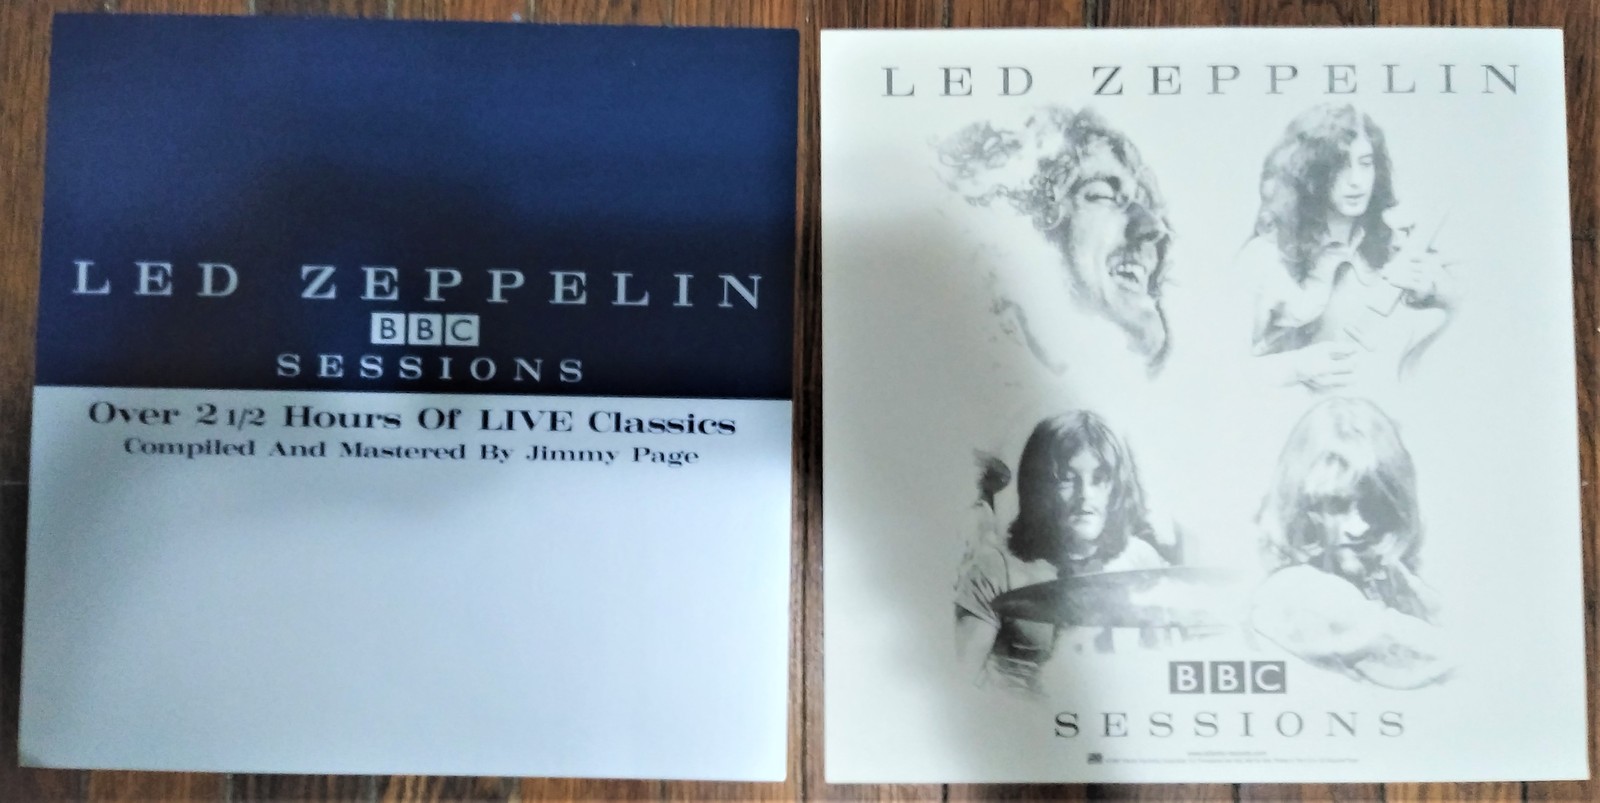 LED ZEPPELIN BBC Sessions Promotional Double-Sided In-Store Flat Display